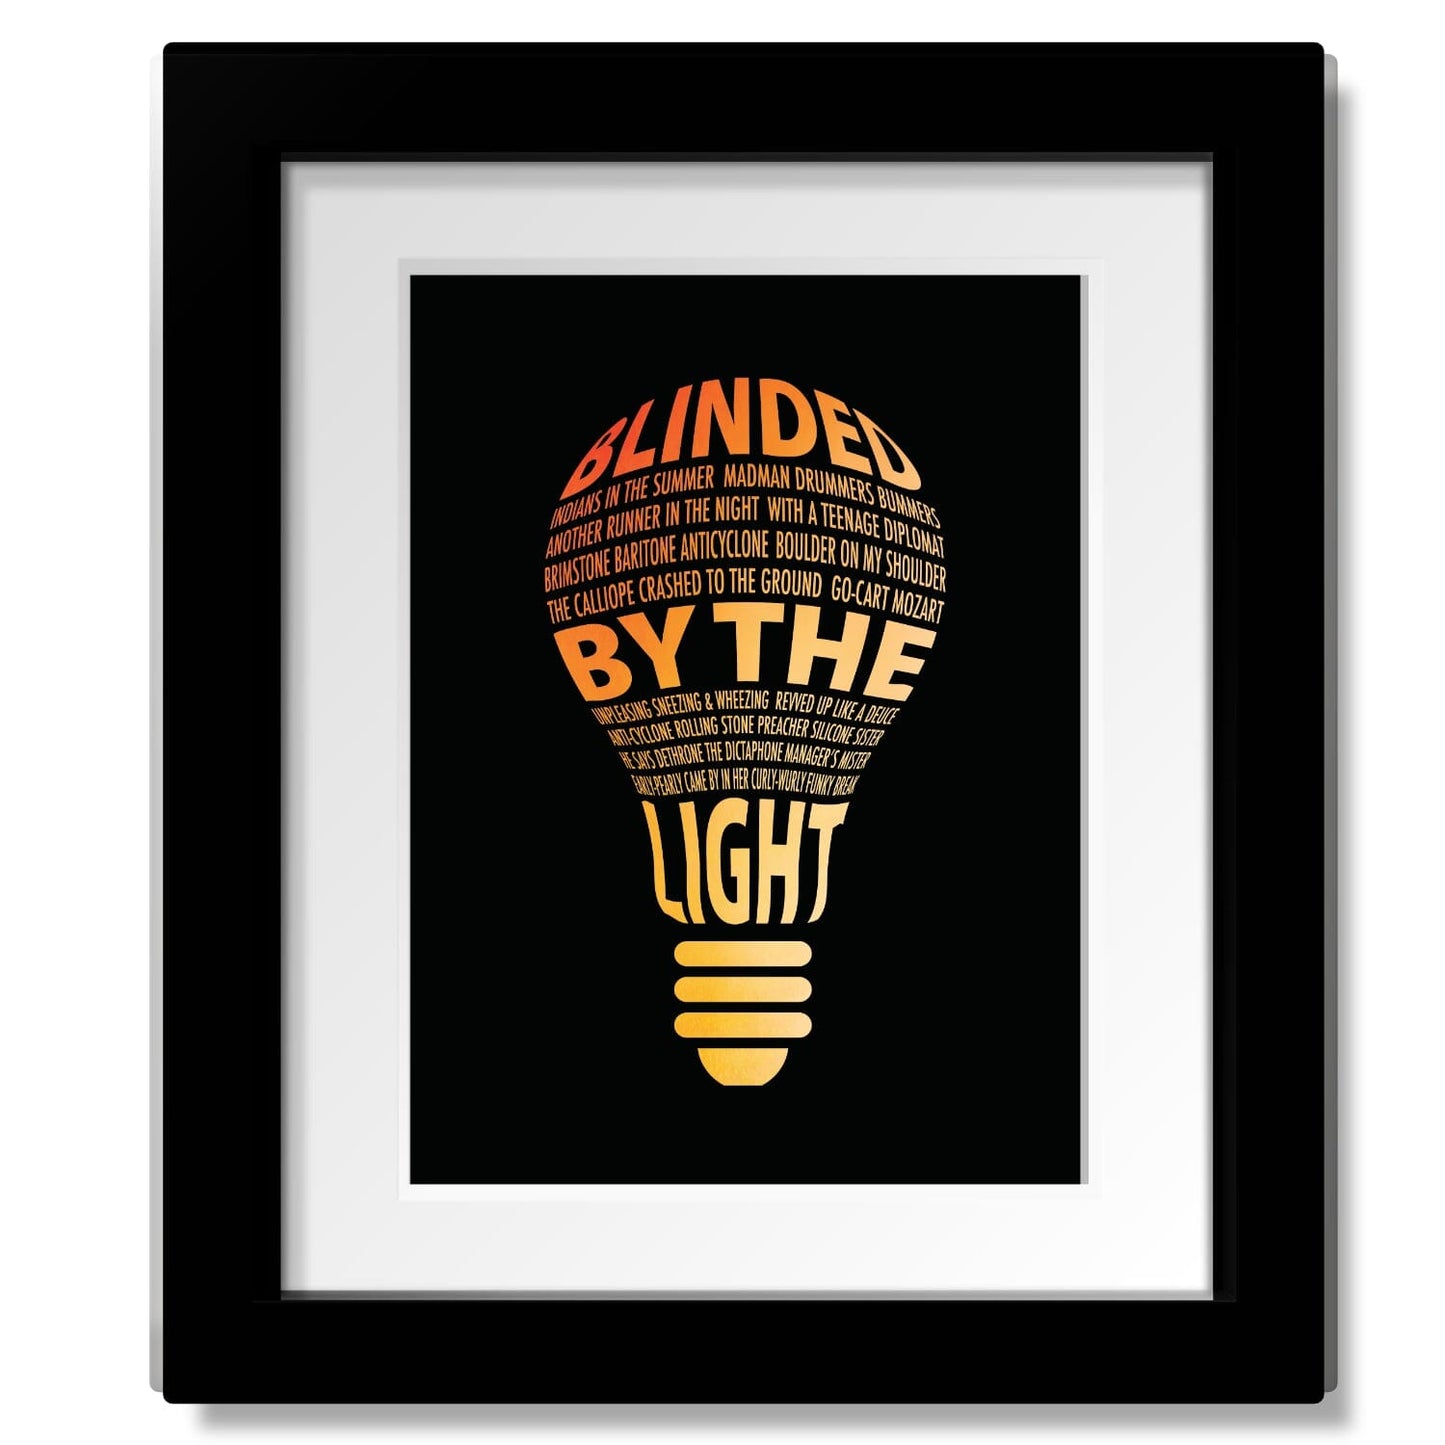 Blinded by the Light by Manfred Mann - 70s Rock Music Print Song Lyrics Art Song Lyrics Art 8x10 Framed and White Matted Print 